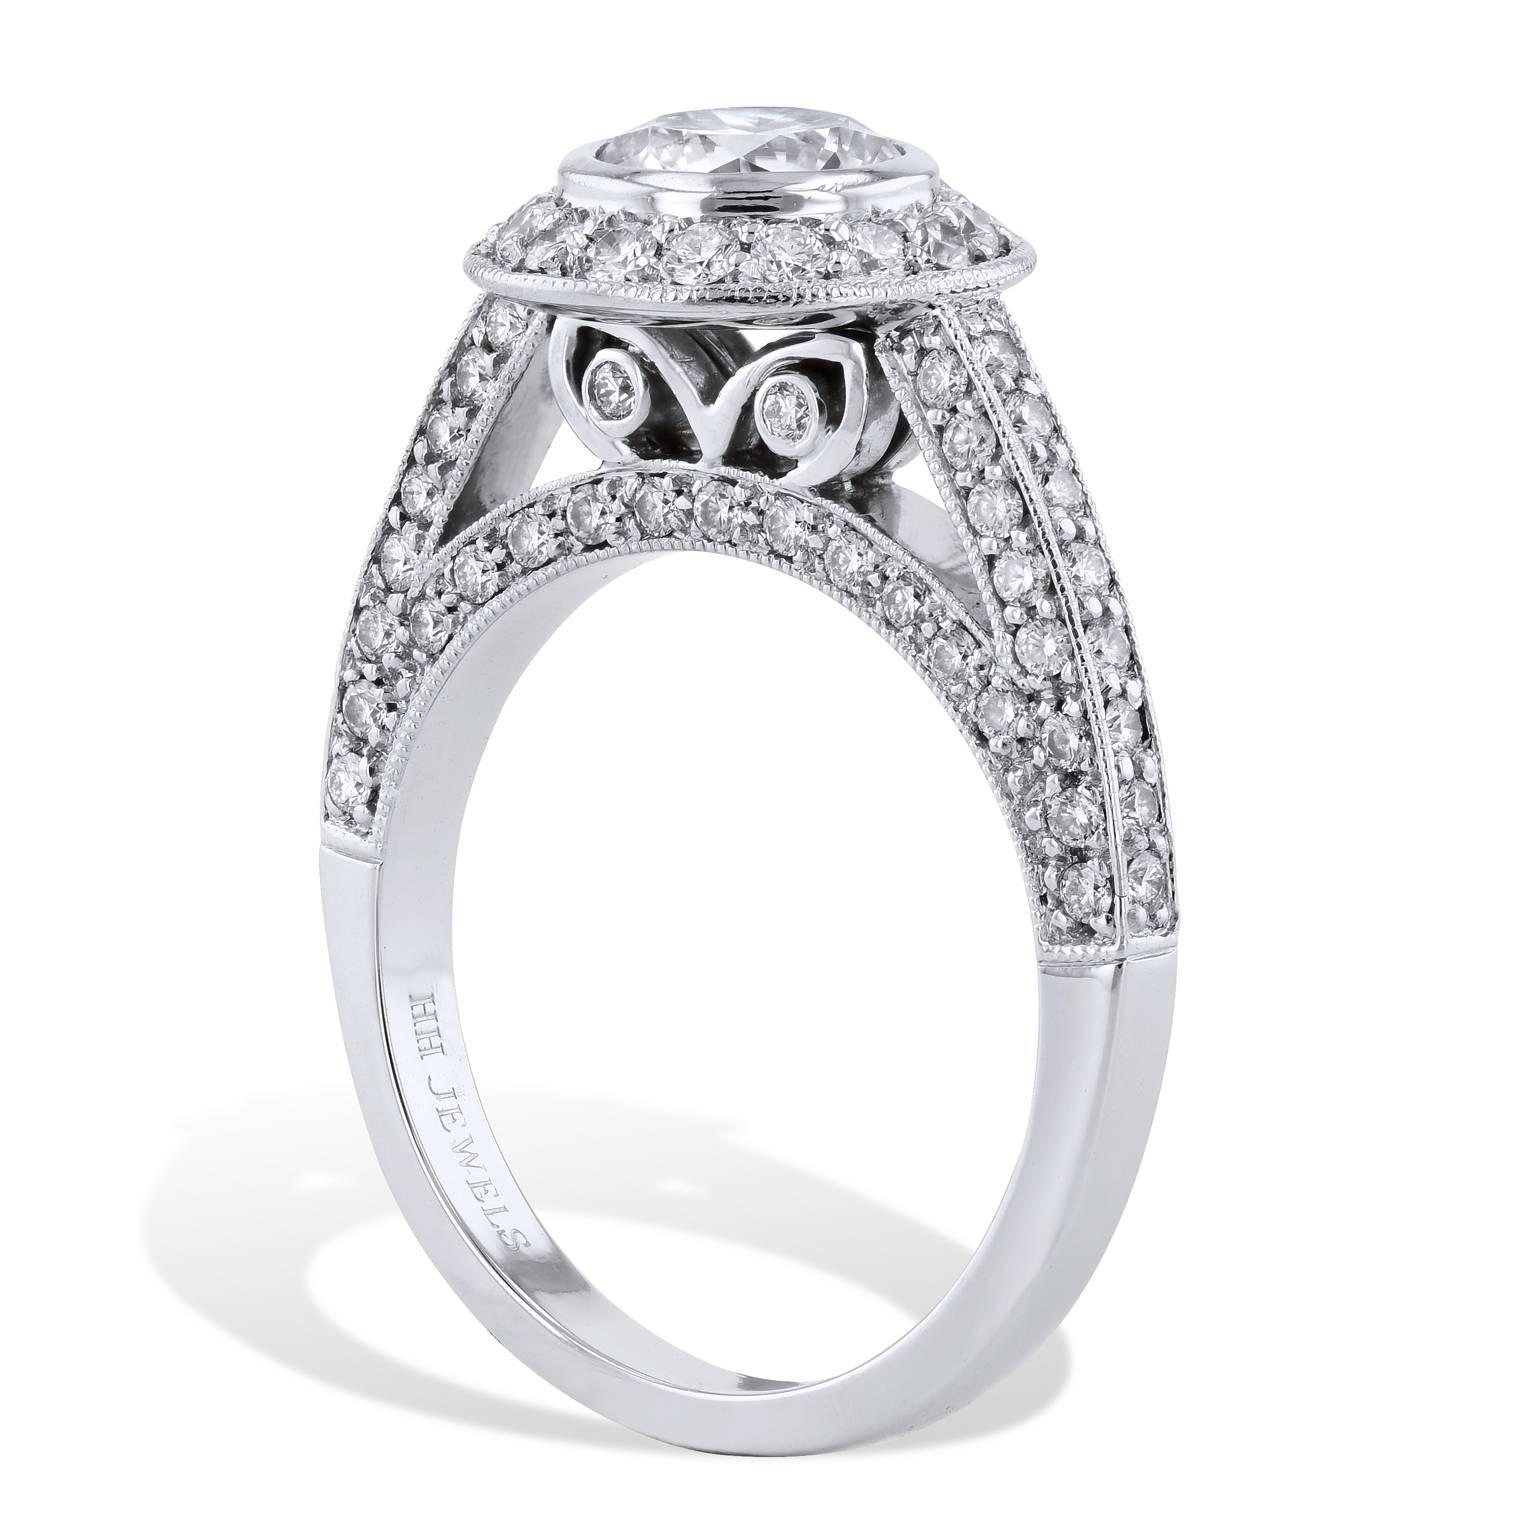 GIA Certified 1.02 Carat Brilliant Cut Bezel Set Halo Diamond Engagement Ring 6

This ring is a handmade creation from H&H Jewels so here is your chance to own a piece of precious elegance with this stunning platinum engagement ring. 
Ornate